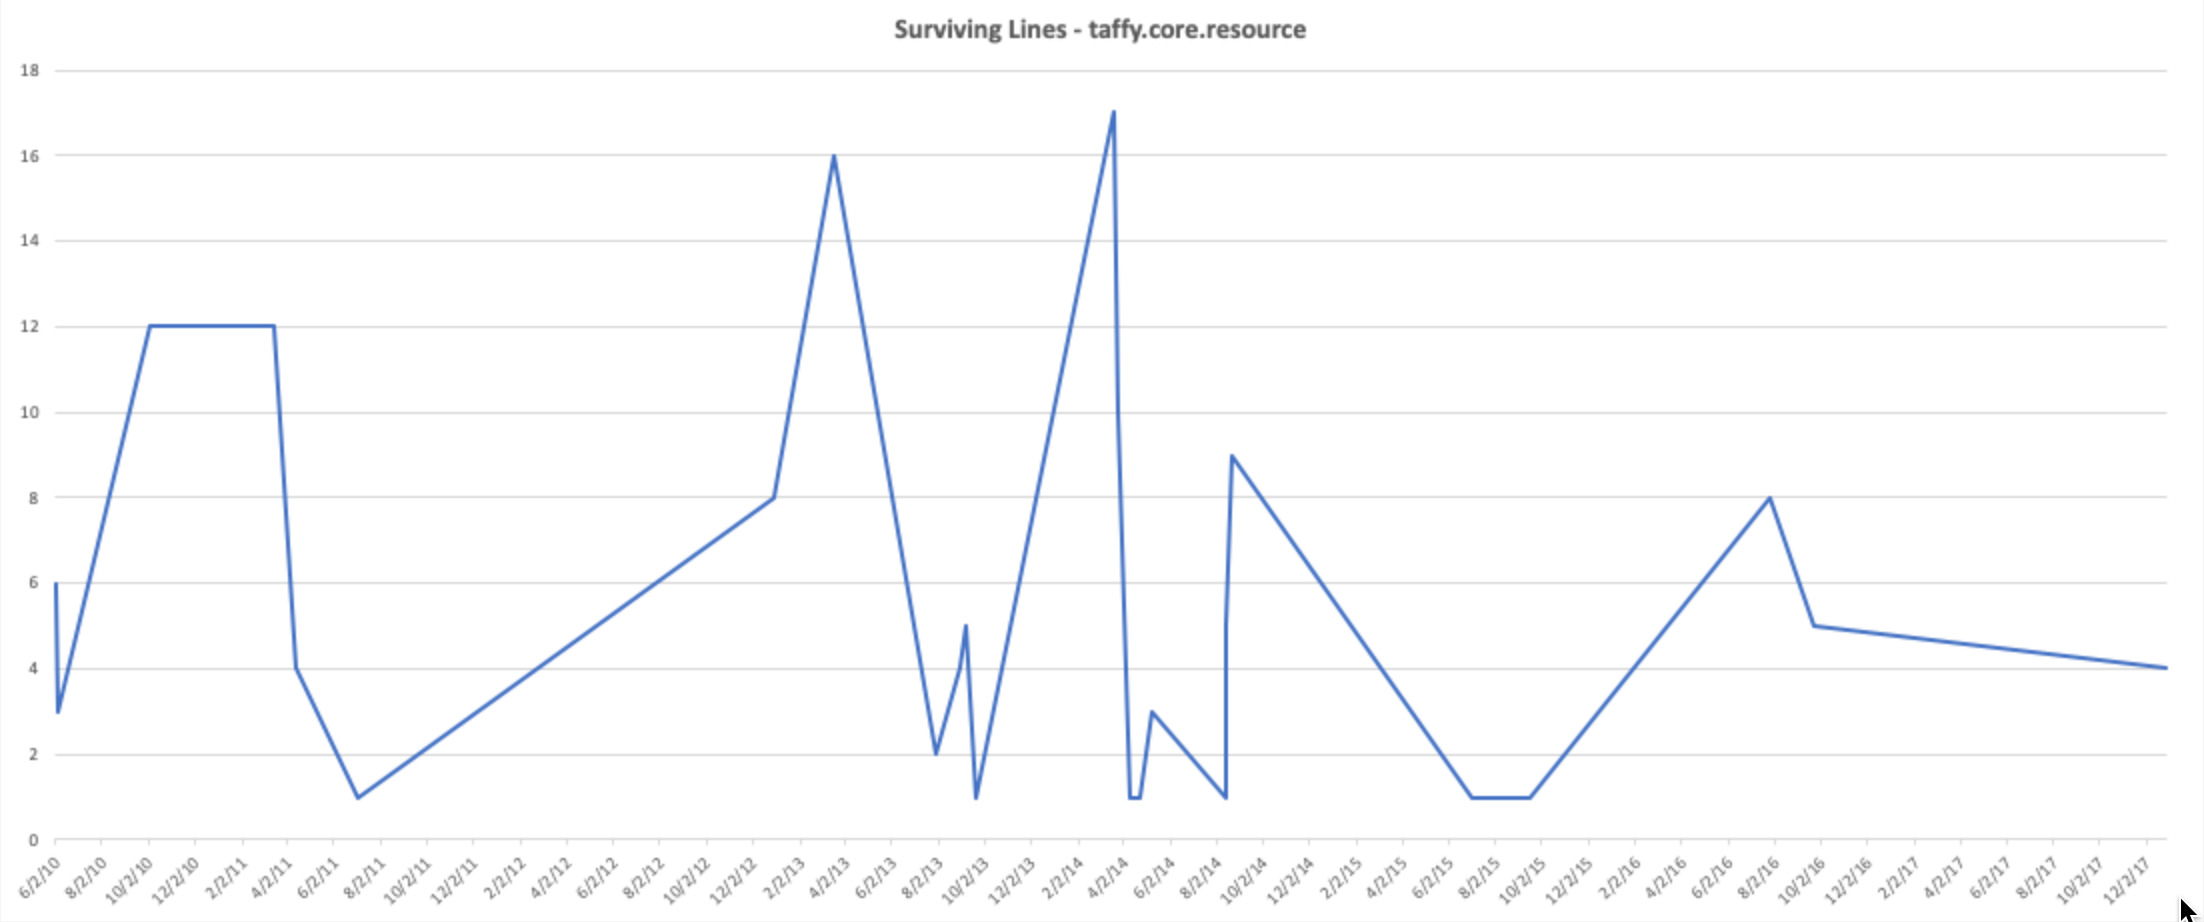 A chart showing the line counts of taffy.core.resource by date they were written.